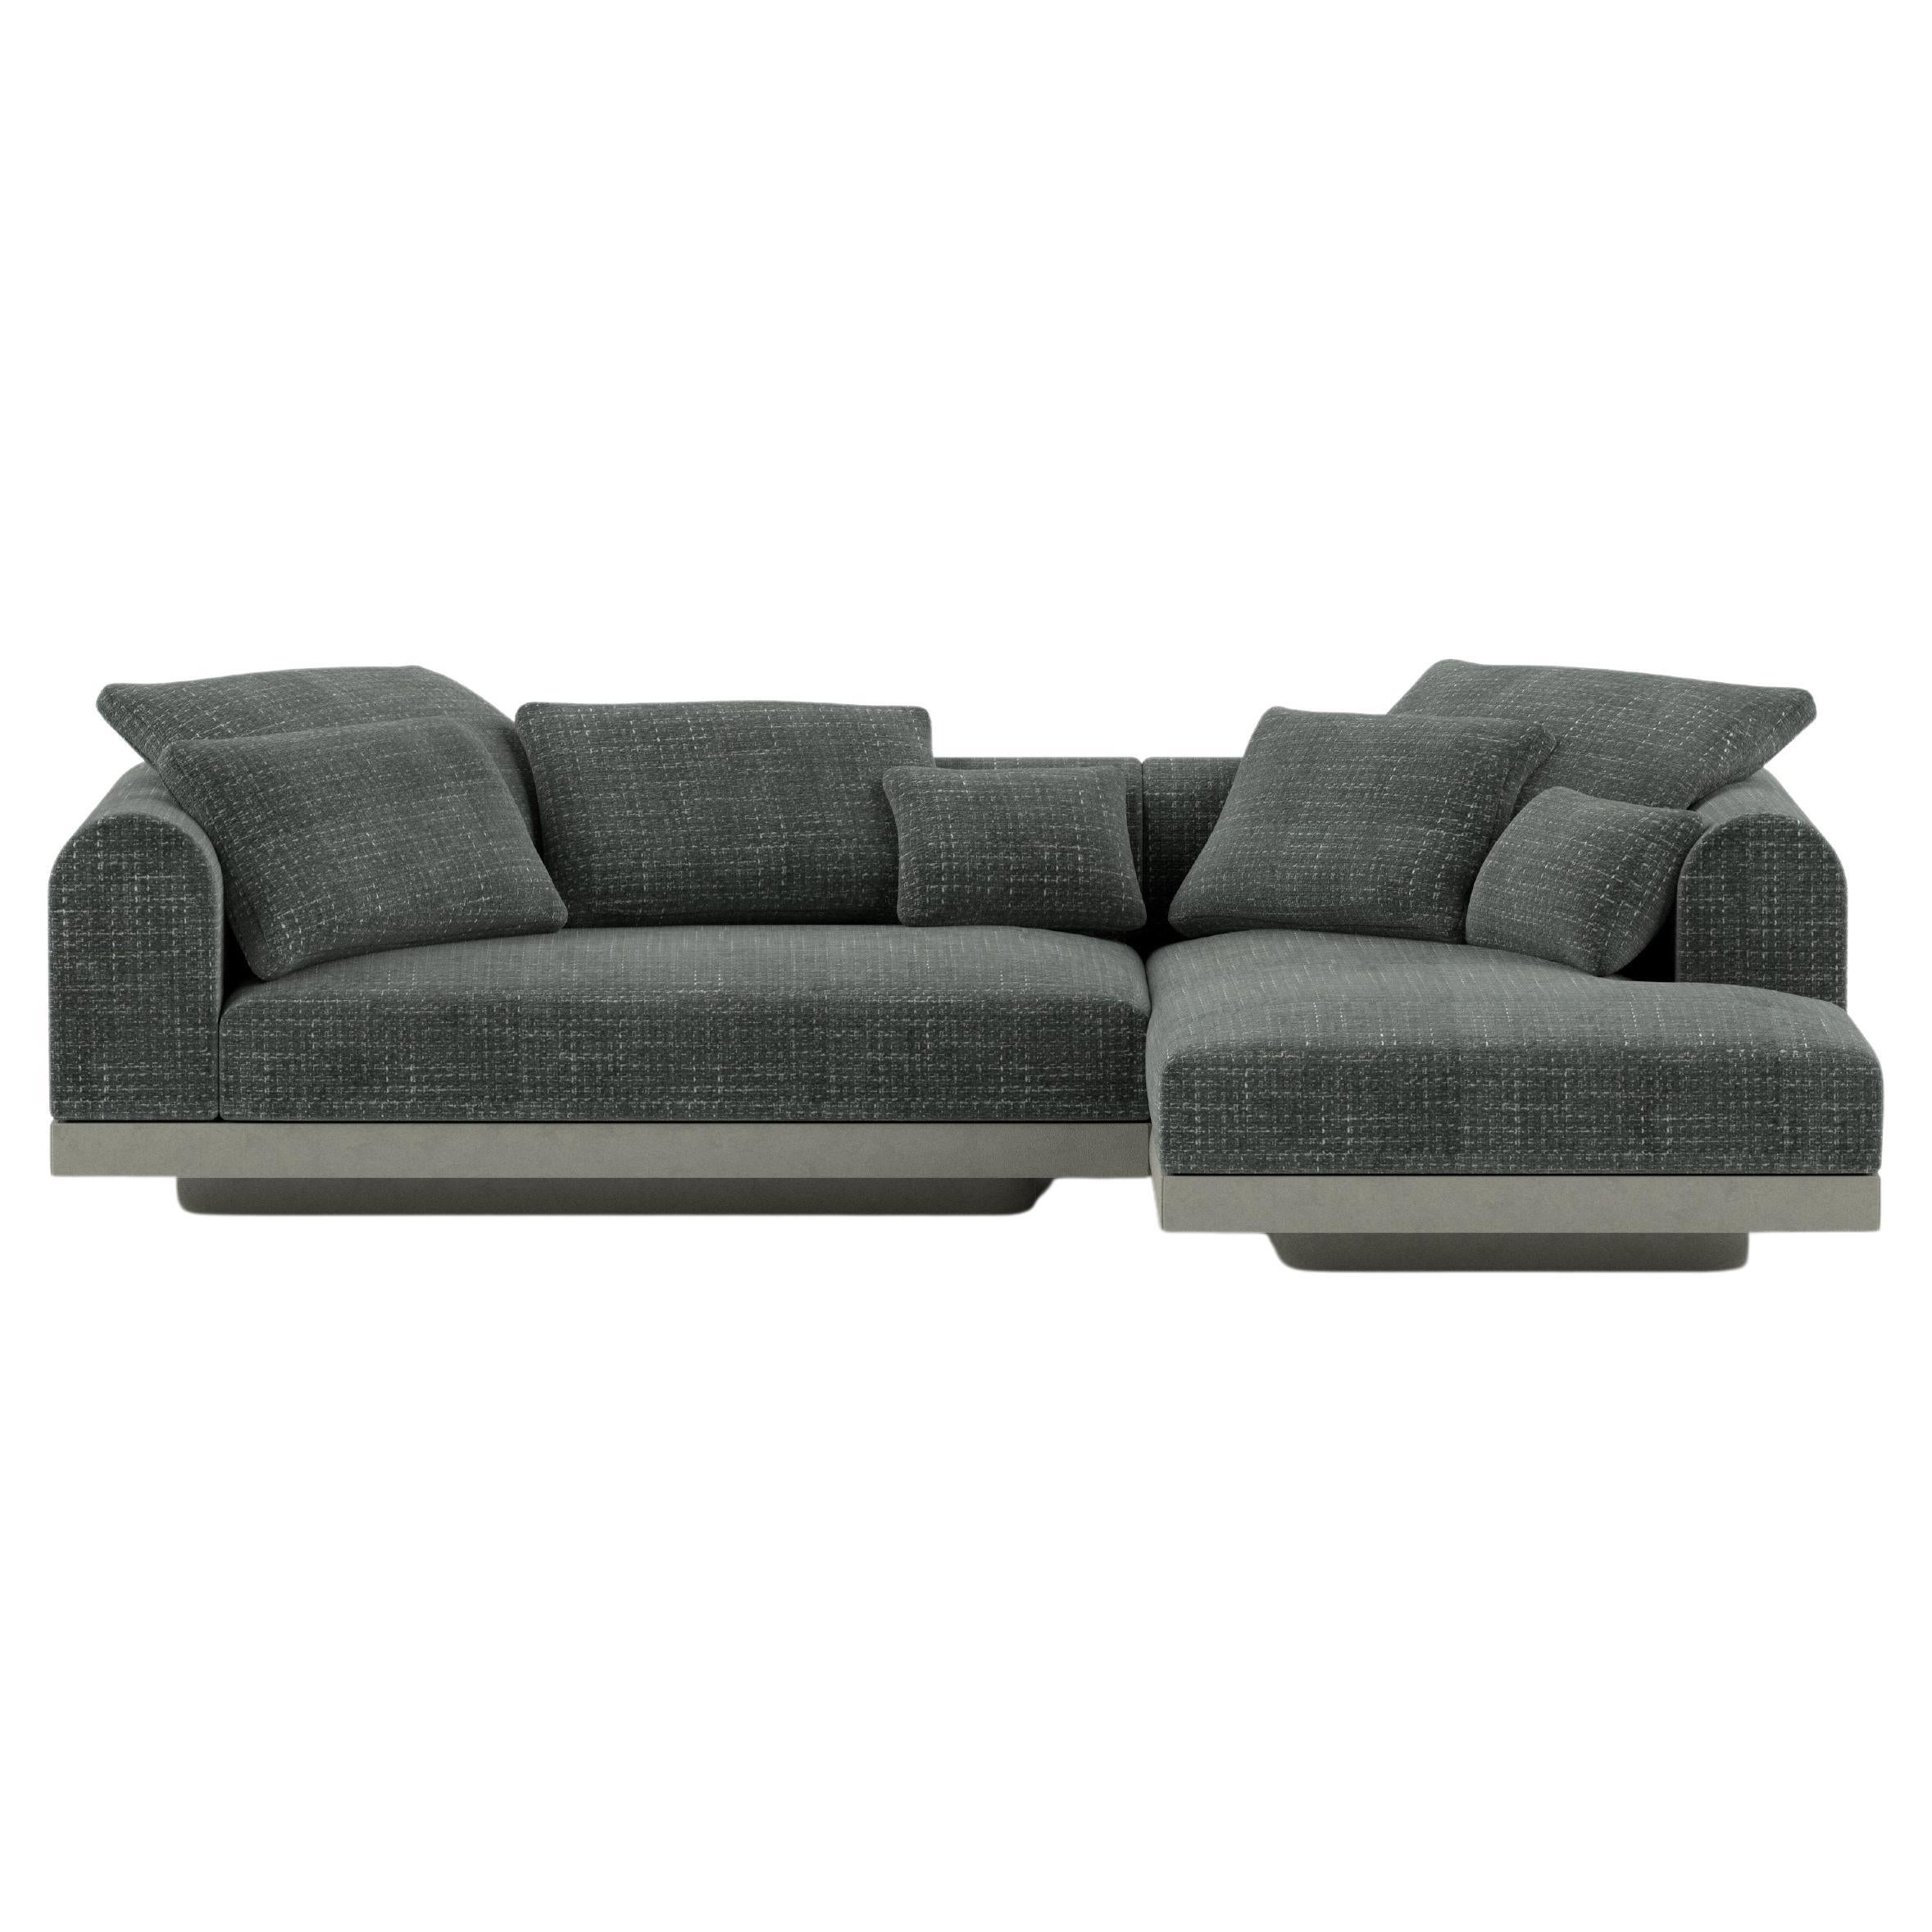 'Aqueduct' Contemporary Sofa by Poiat, Setup 1, Yang 95, High Plinth For Sale